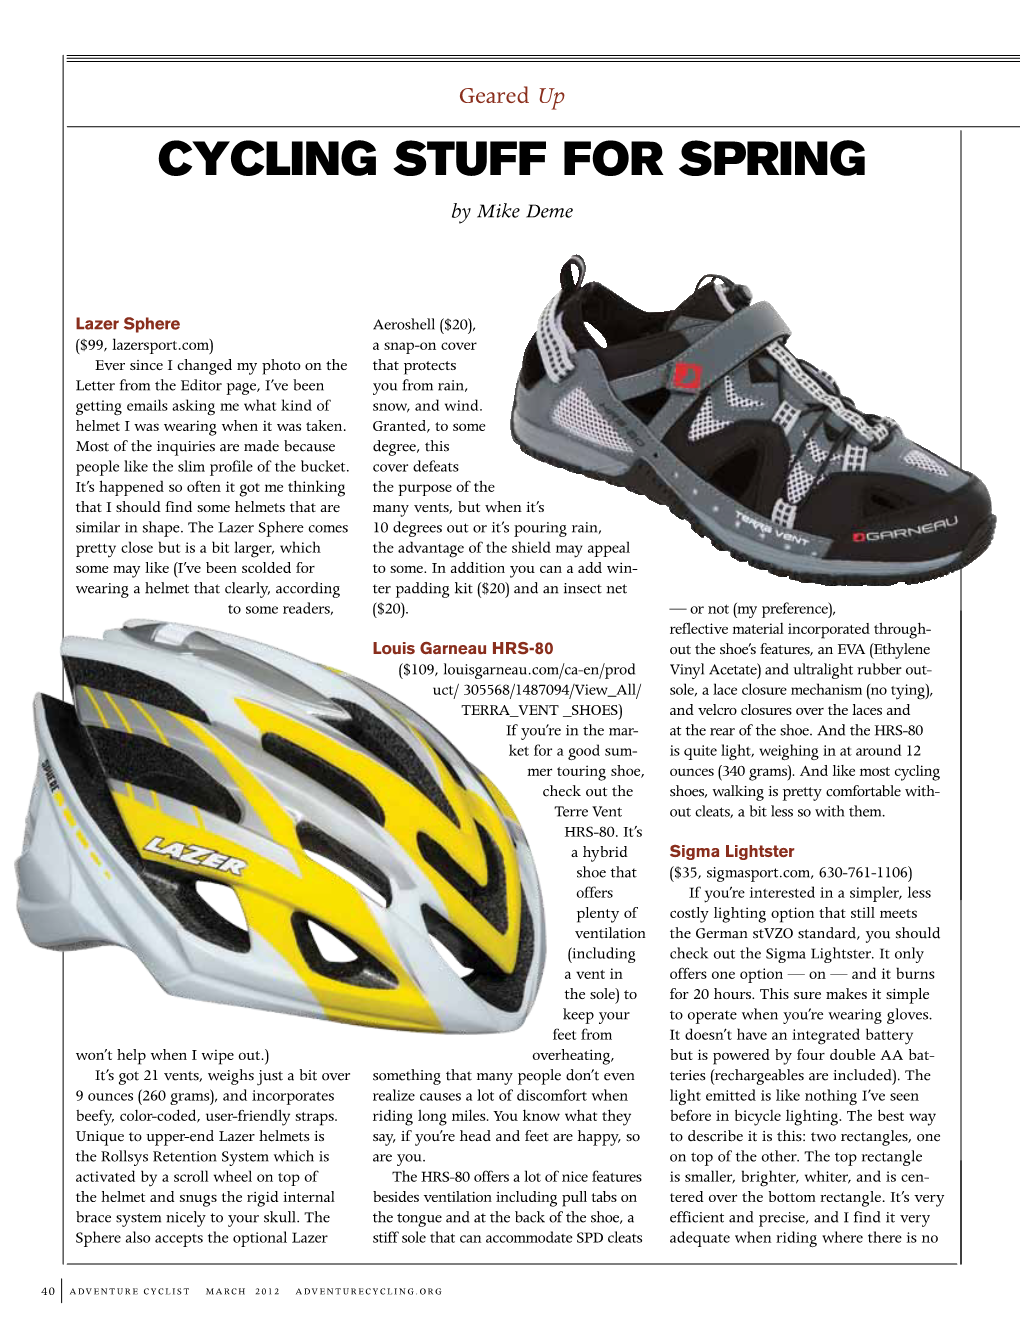 Cycling Stuff for Spring by Mike Deme